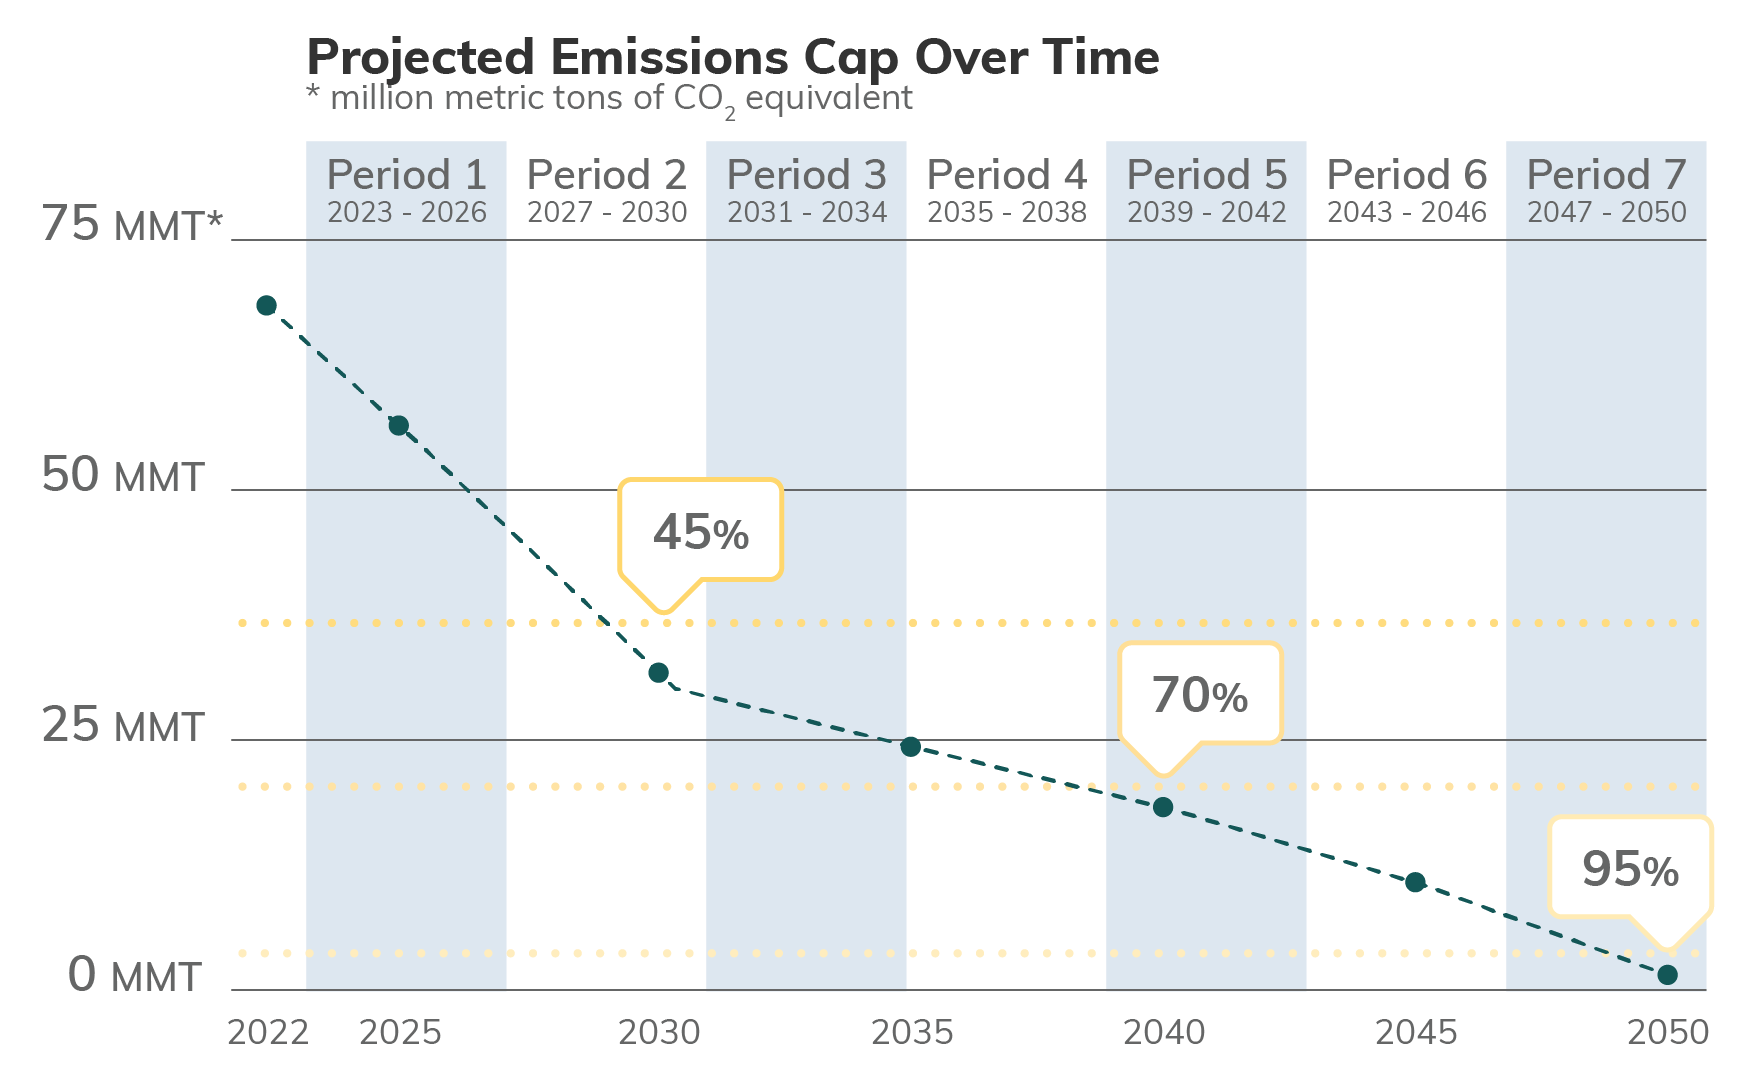 A graph showing the emissions cap reduction starting at 71 million metric tons of CO2 in 2022 and decreasing to 5 million by 2050